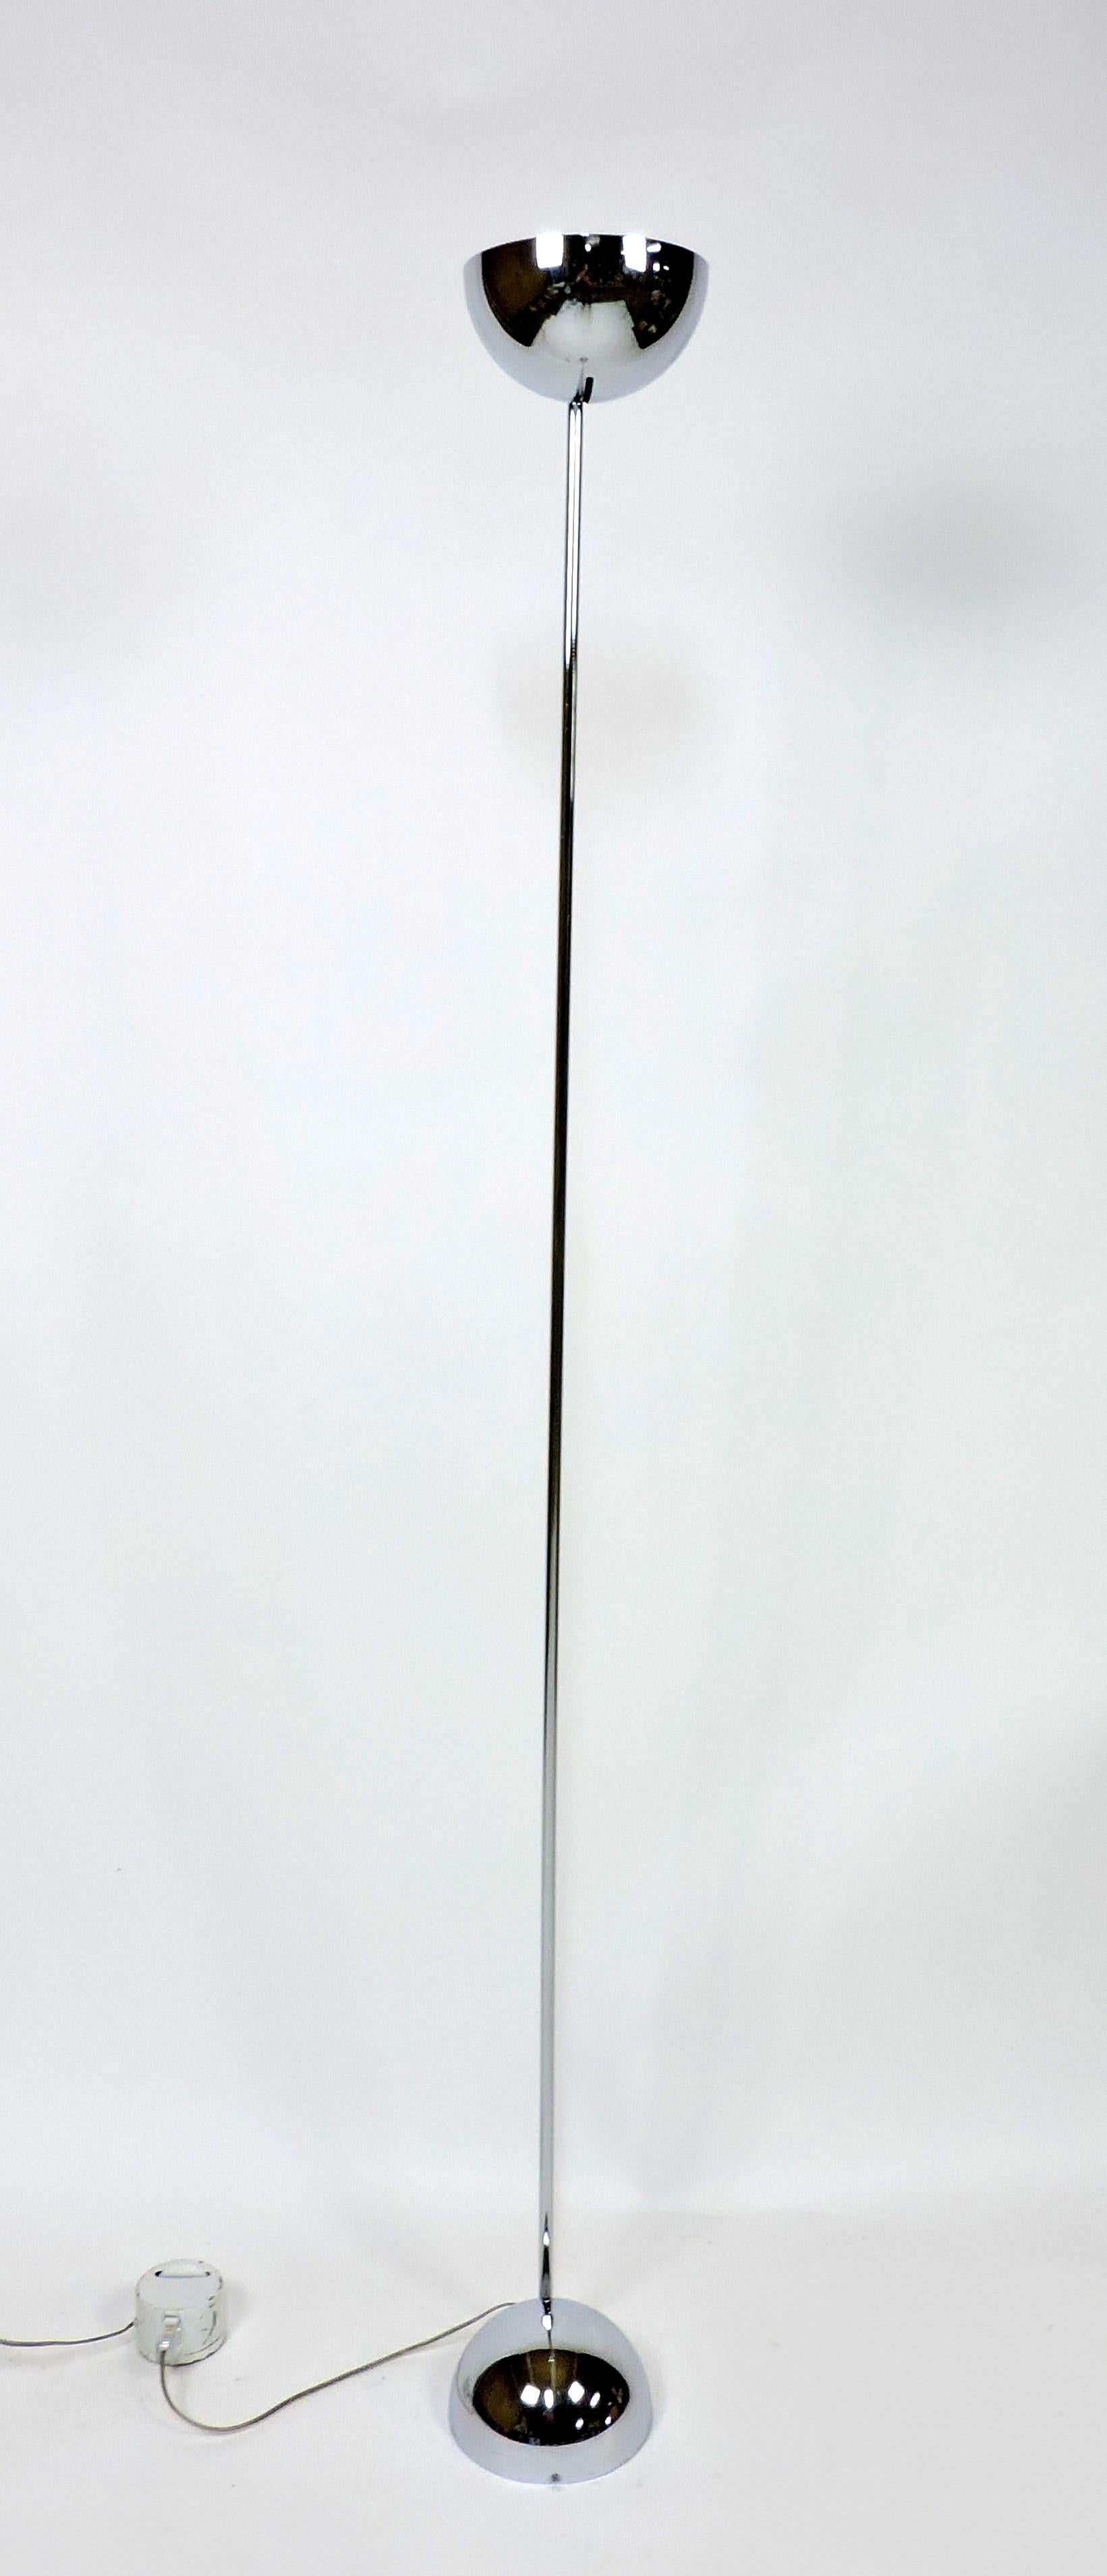 This beautiful and minimalist floor lamp was designed by Robert Sonneman and manufactured by Kovacs. The lamp is made of high-quality chrome and is heavy and well-made. It consists of two half-spheres, one at the top and one at the bottom, connected